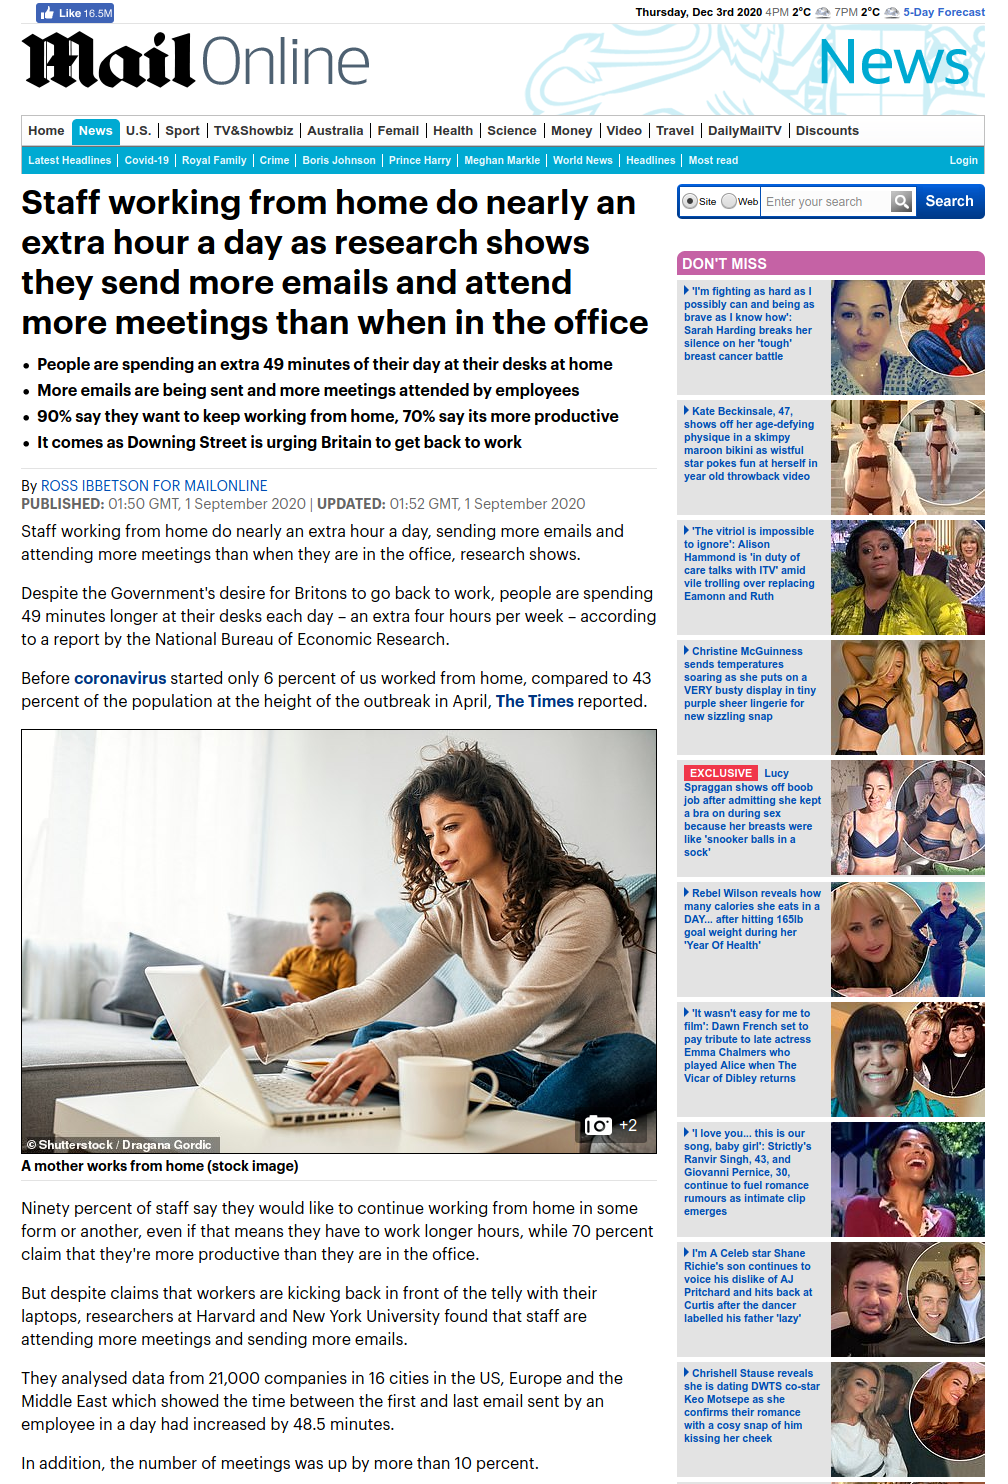 Daily Mail screenshot of the same stock image used